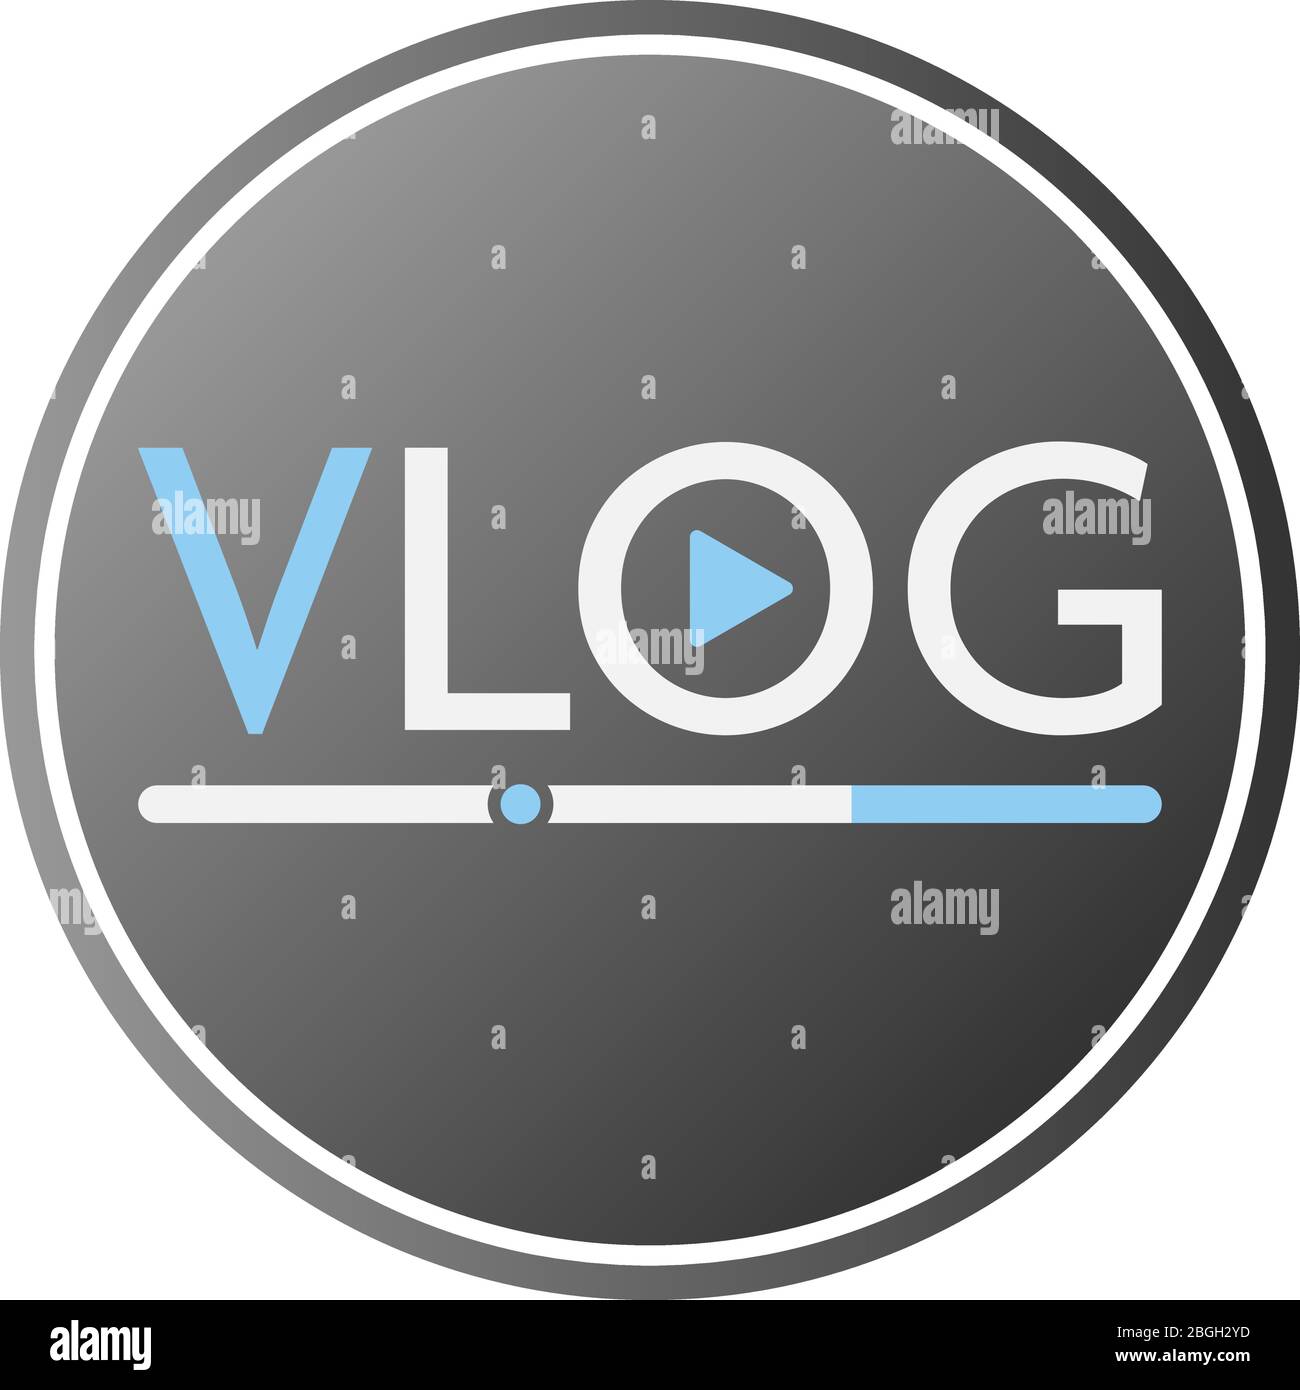 round flat vlog icon or symbol with play button vector illustration Stock Vector